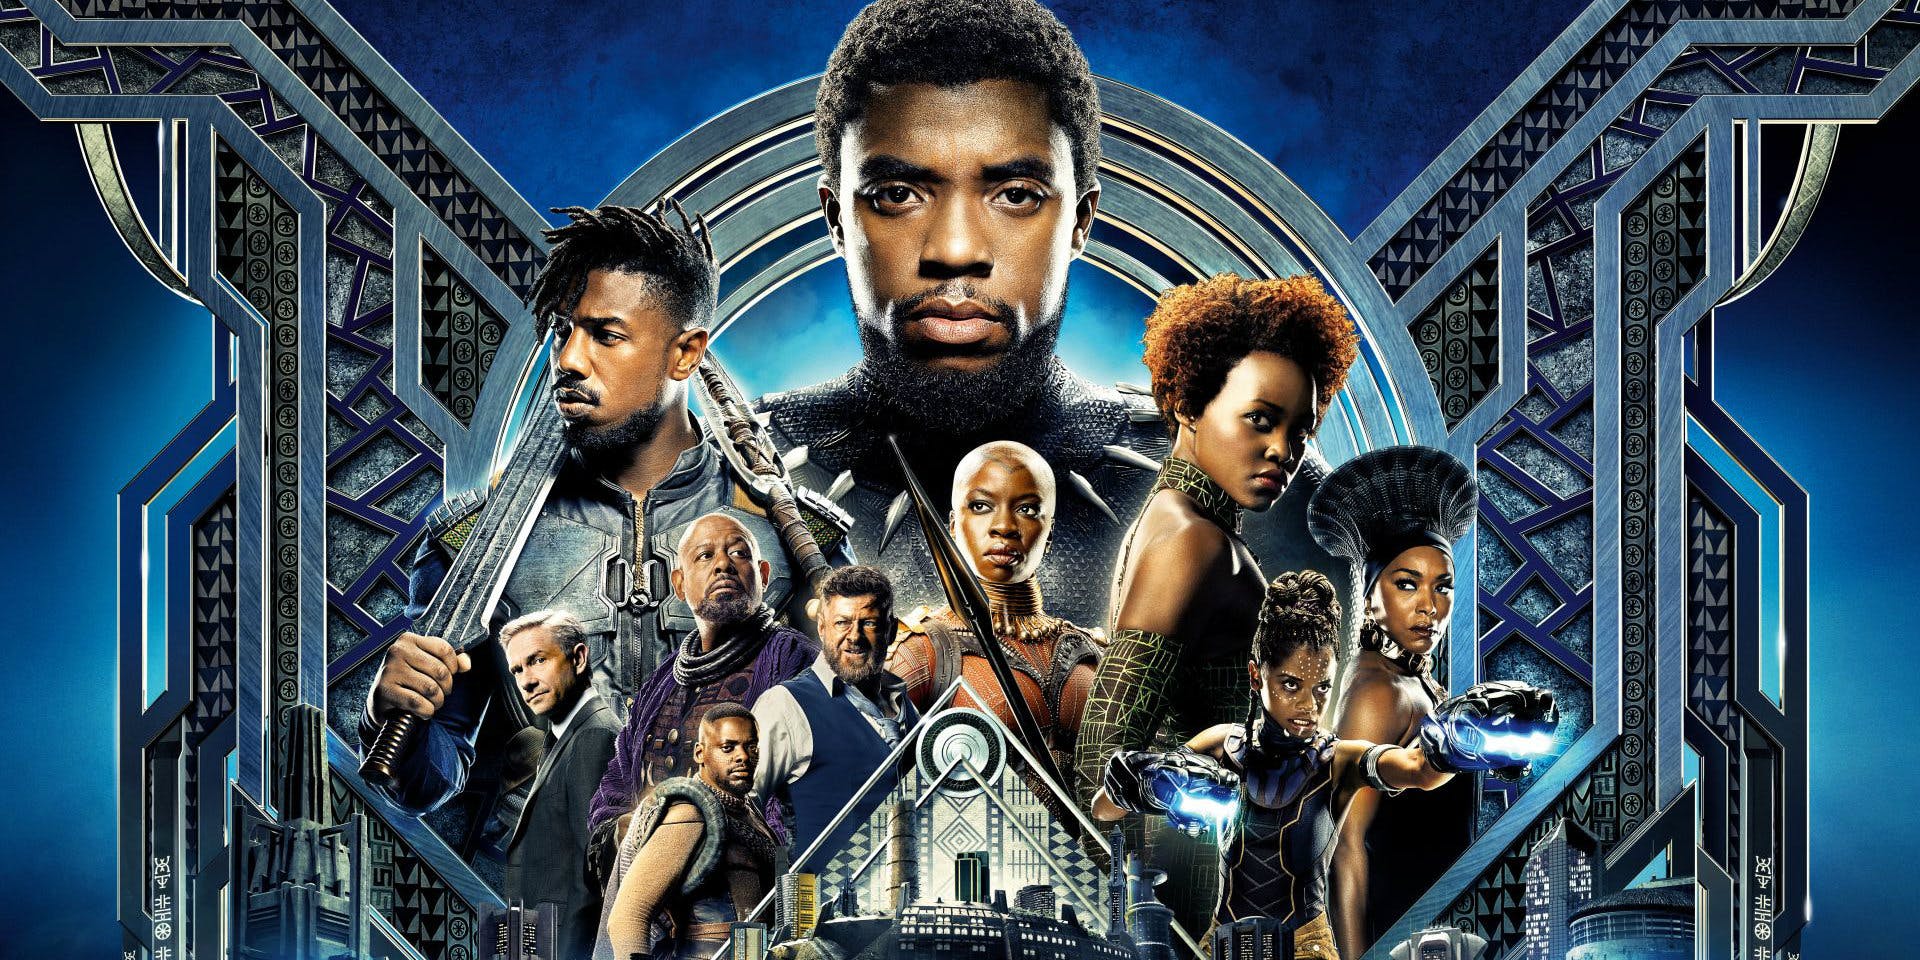 'Black Panther' review: A marvelous new king rises